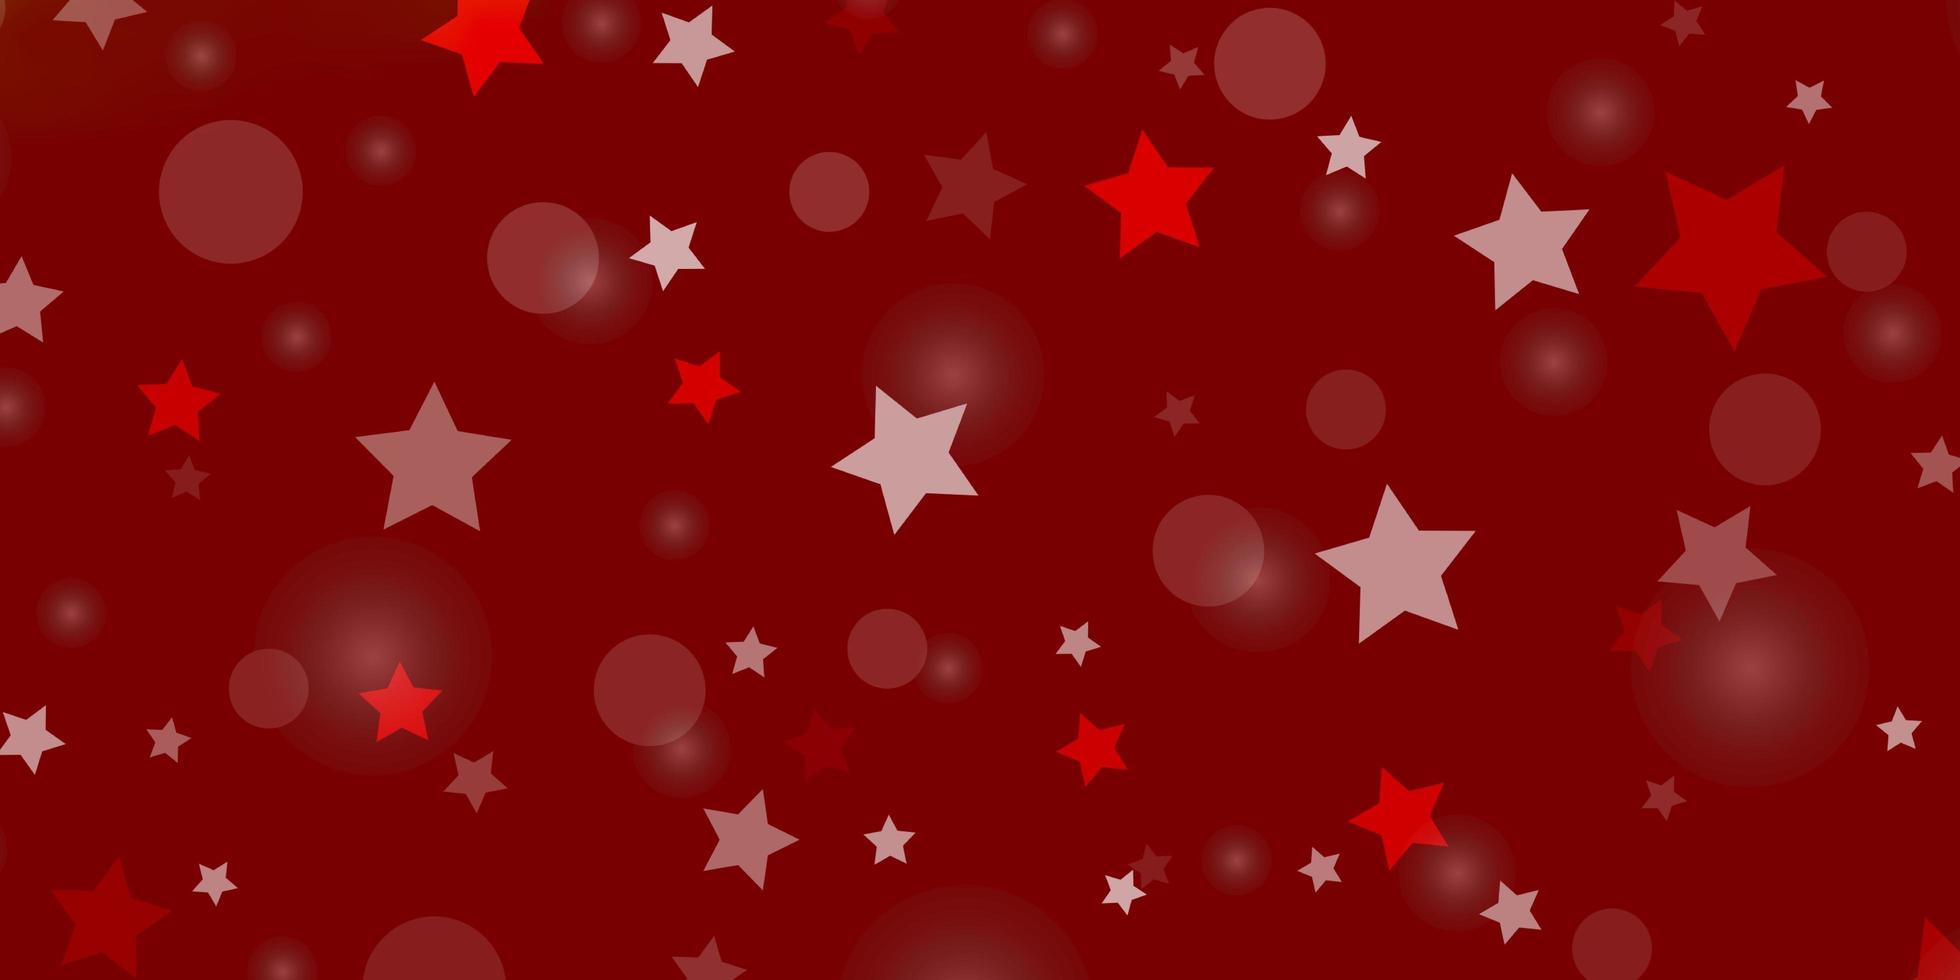 Light Red vector texture with circles, stars. Abstract illustration with colorful spots, stars. Texture for window blinds, curtains.